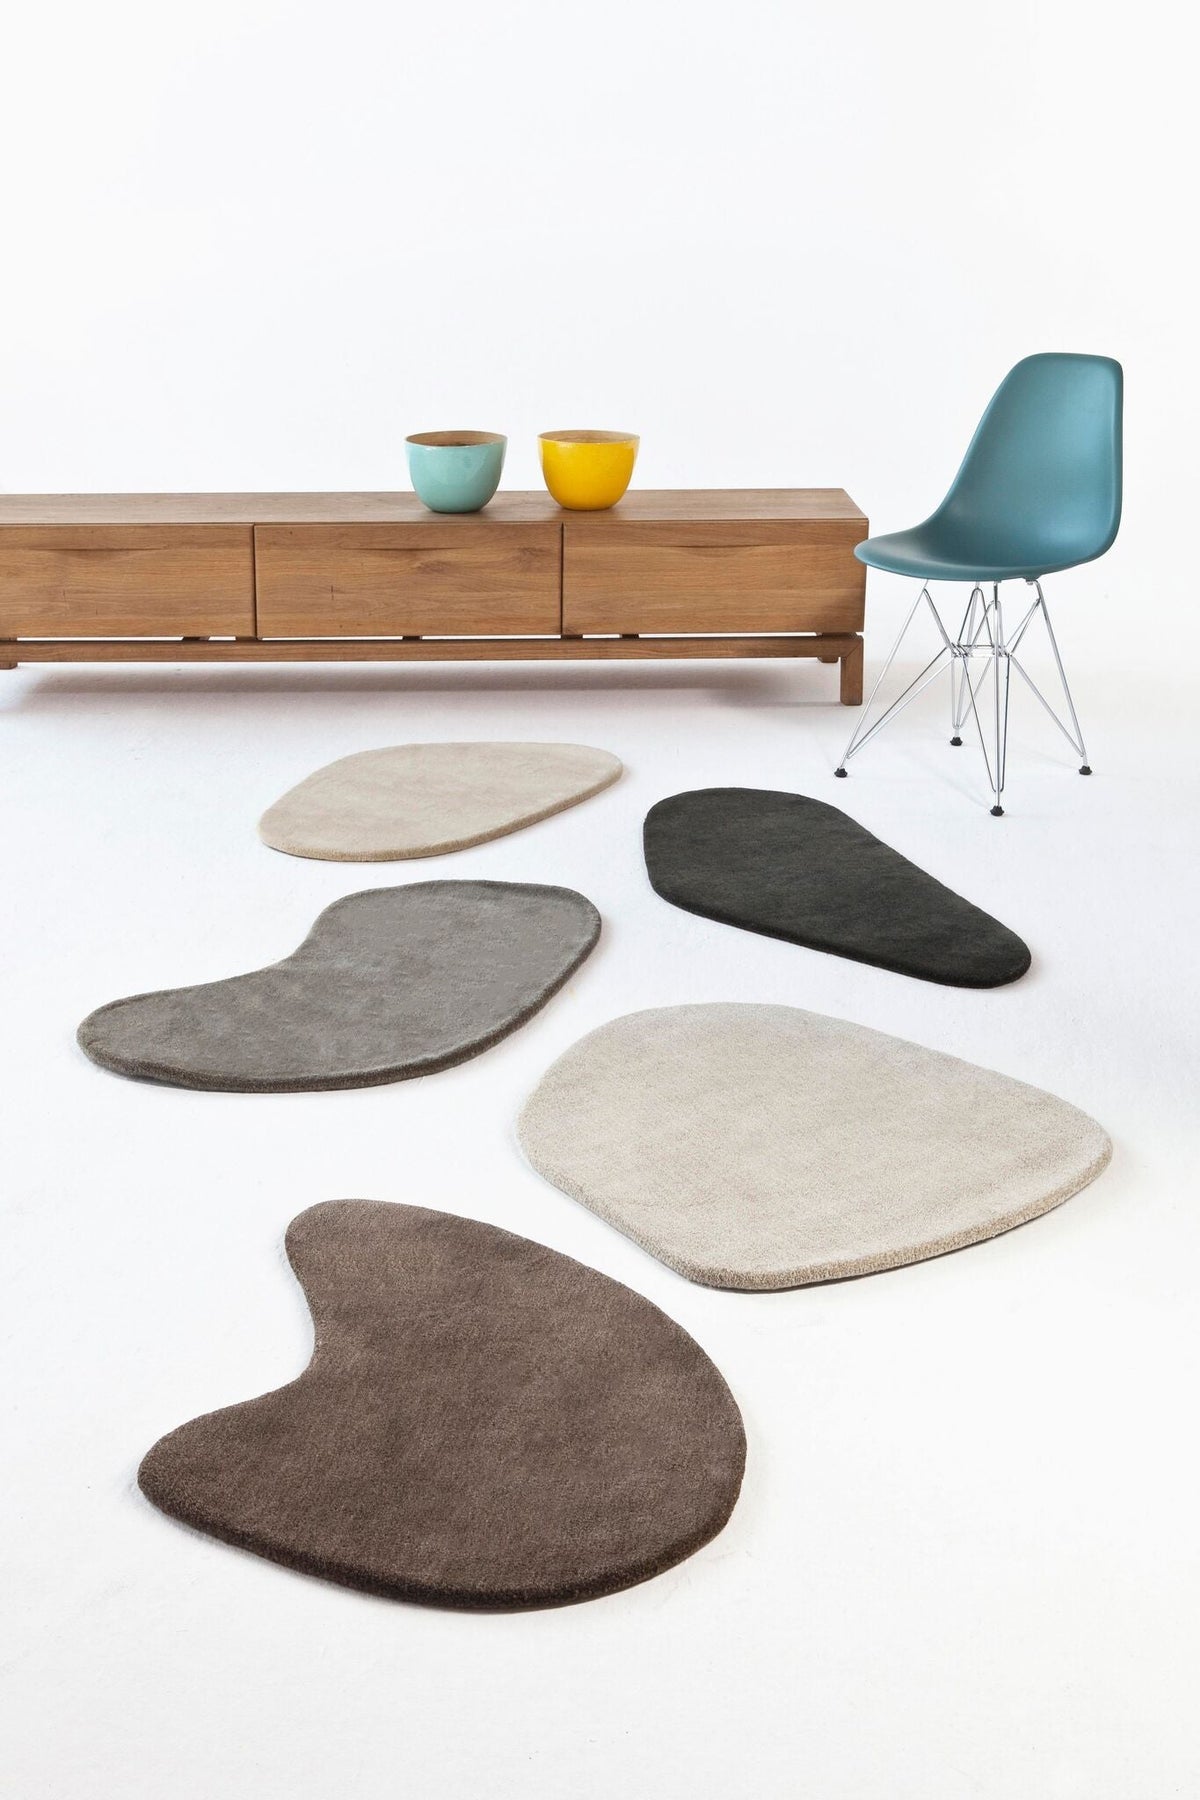 Stone-wool Little Stone 9 Rug-Nanimarquina-Contract Furniture Store